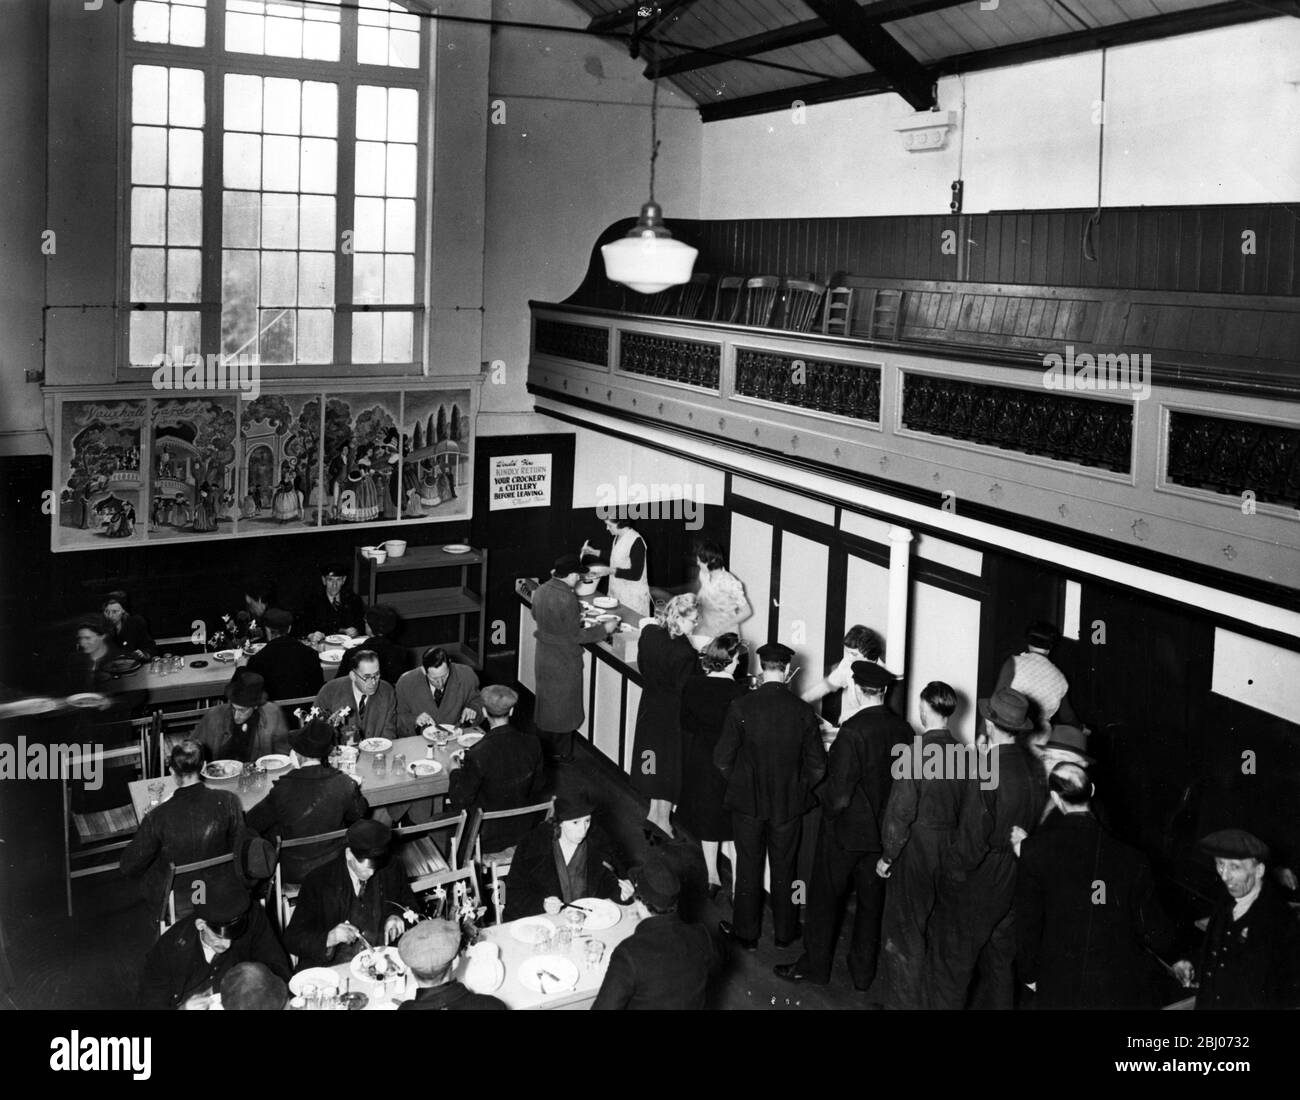 St Anne's Cash and Carry Kitchen at Vauxhall , London in the 1940s Stock Photo